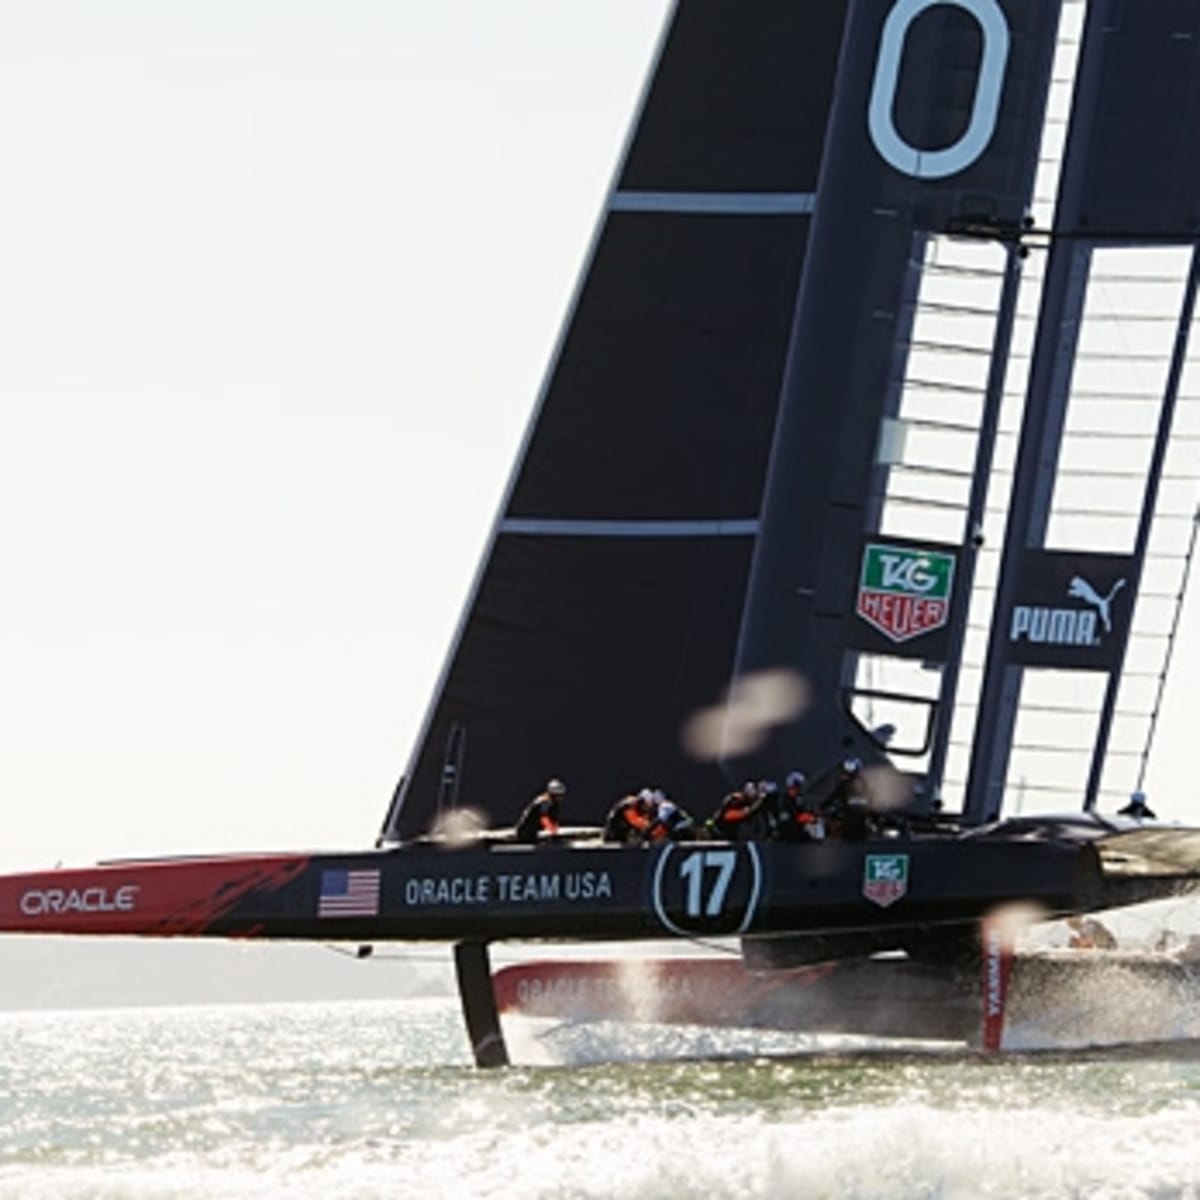 America's Cup floats Louis Vuitton's boat